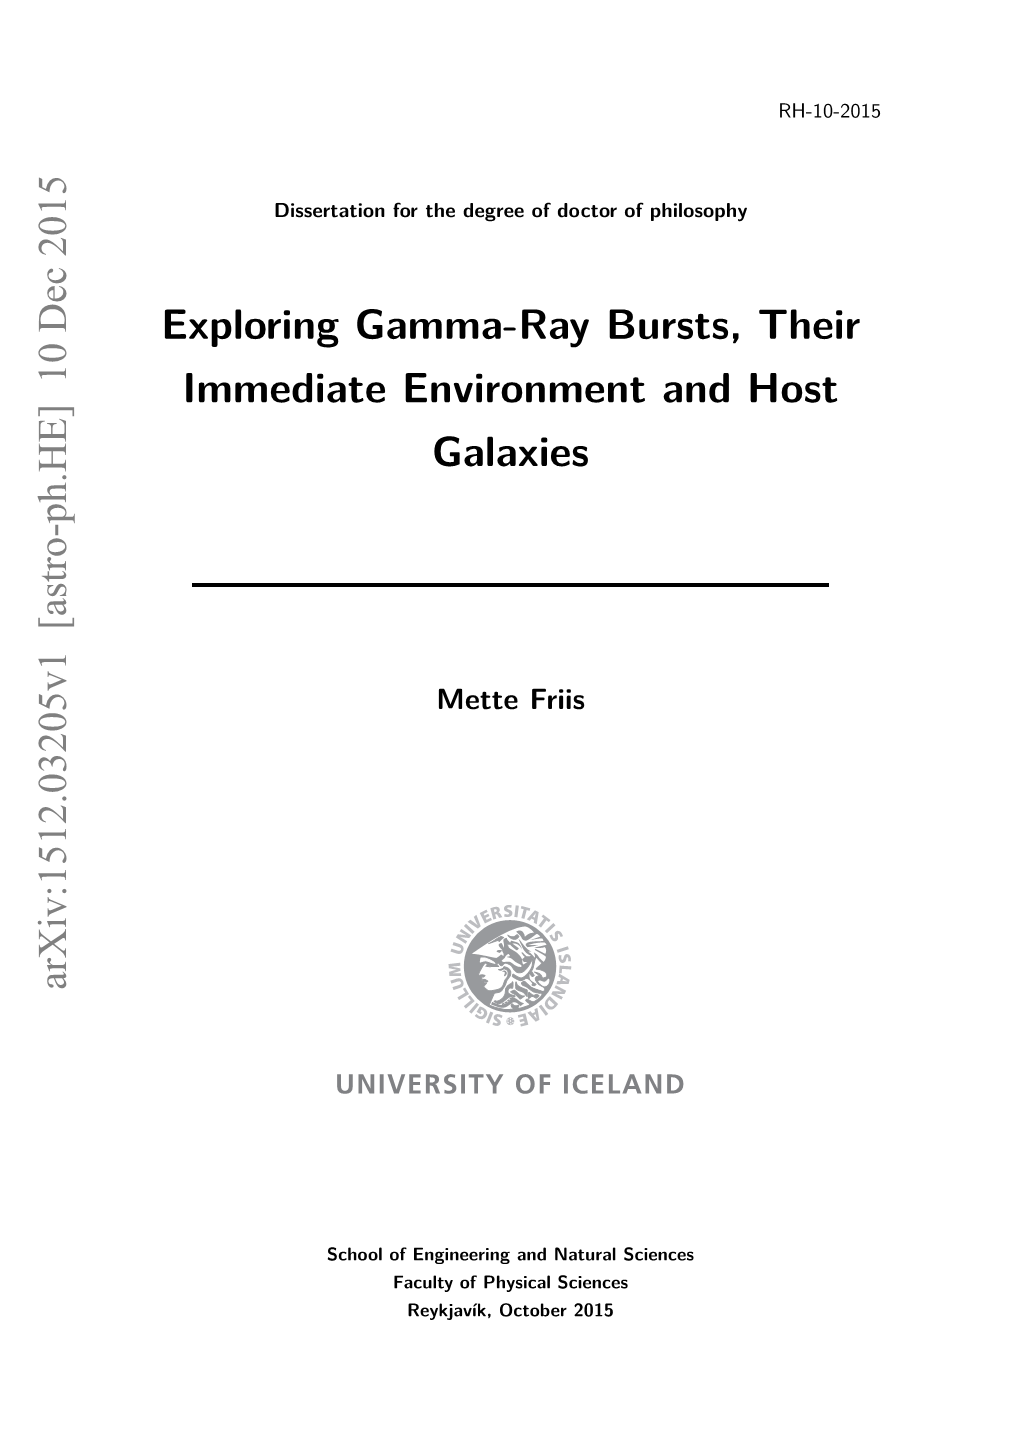 Exploring Gamma-Ray Bursts, Their Immediate Environment and Host Galaxies C 2015 Mette Friis